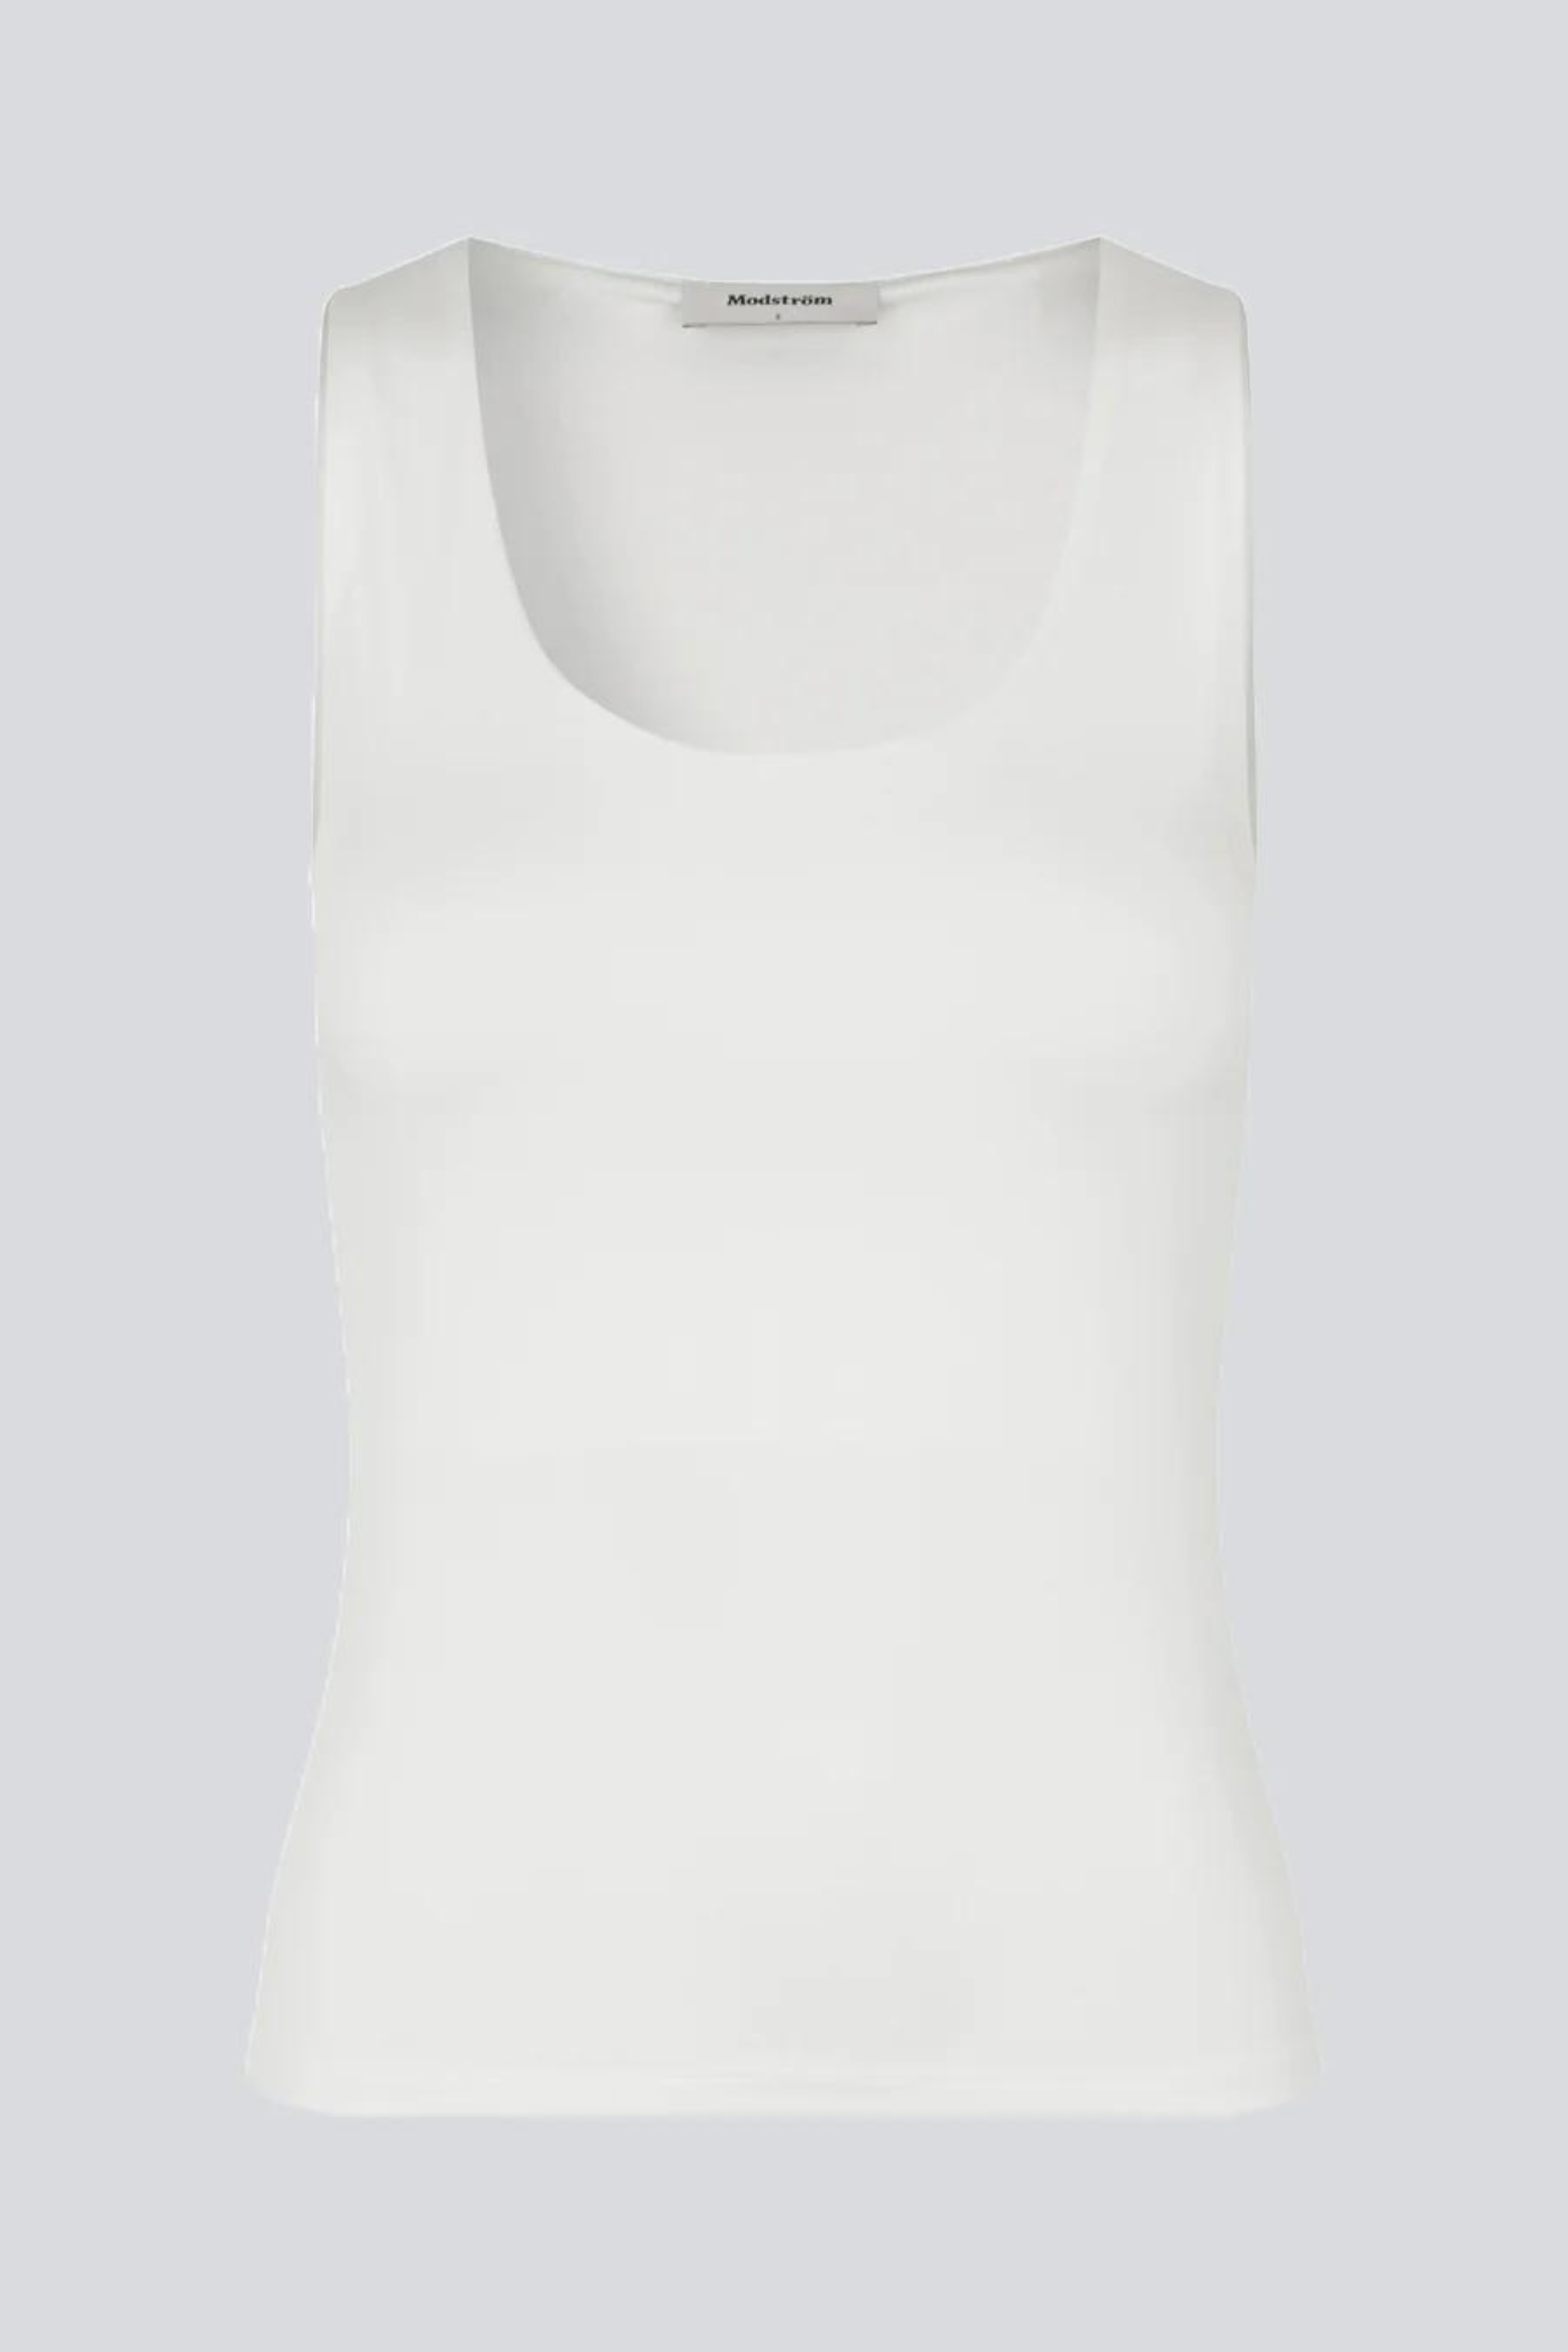 HIMAMD TOP - SOFT WHITE